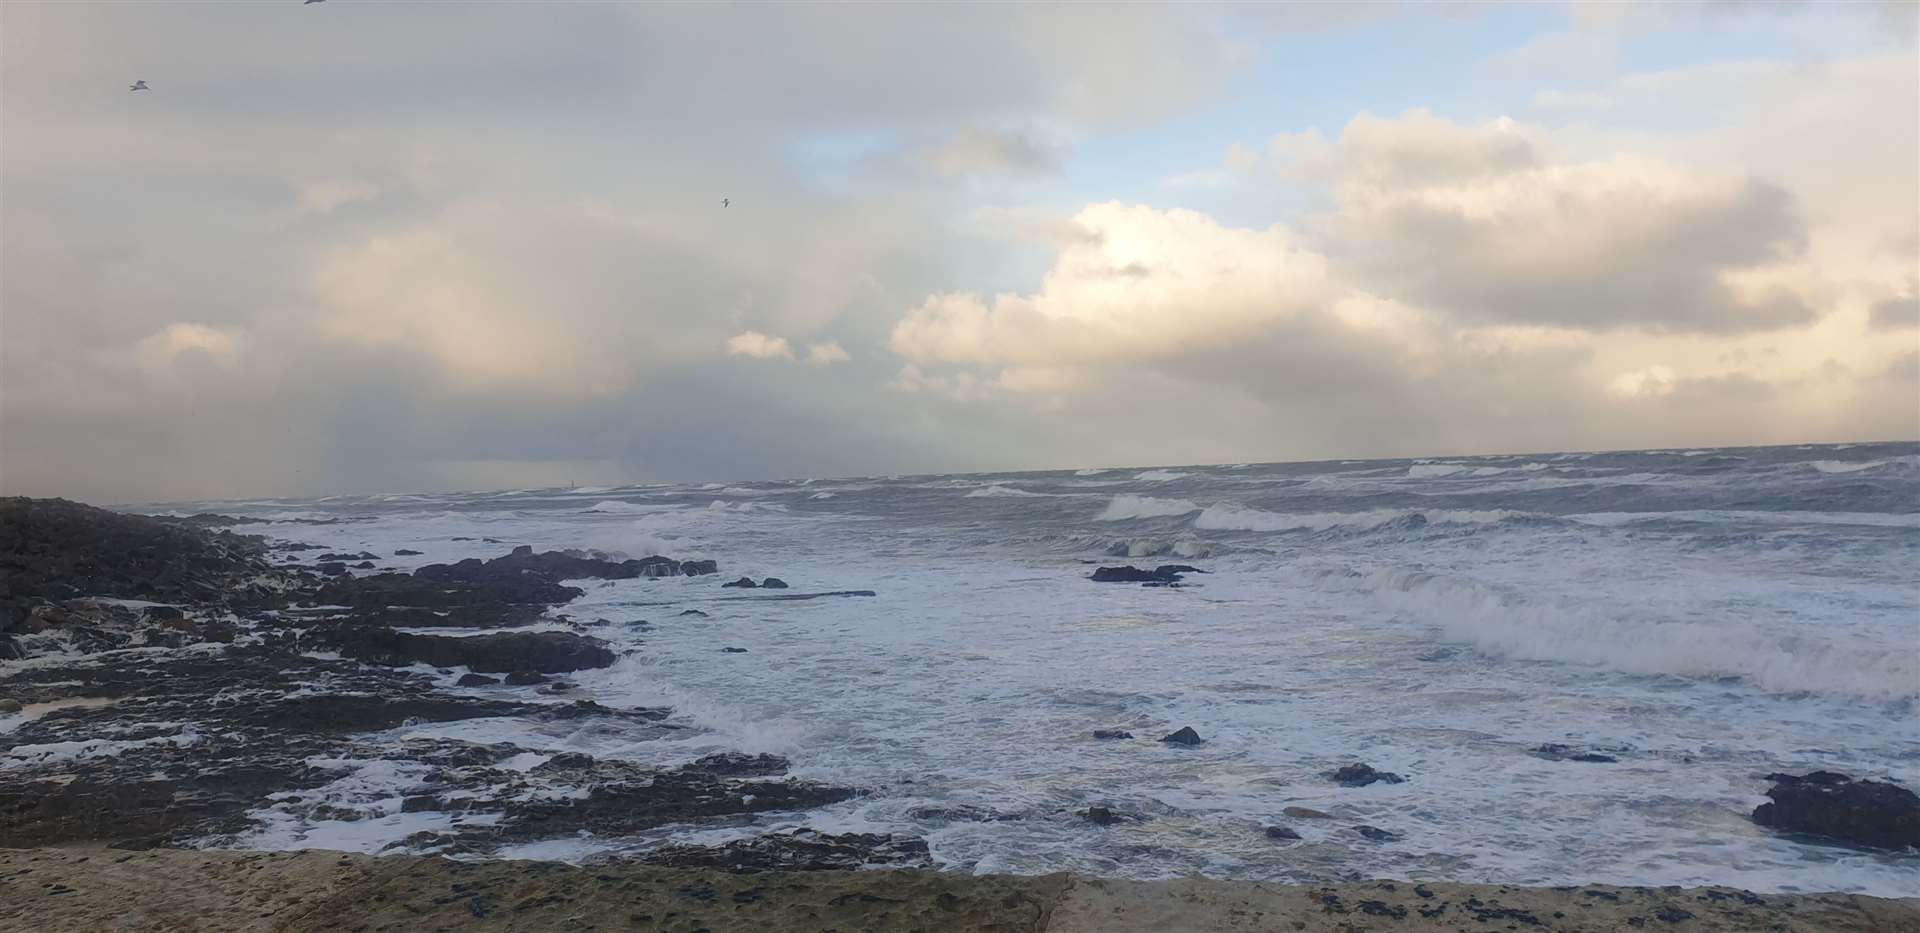 Calmer on Saturday morning but the stormy sea still whipped up by Storm Arwen.